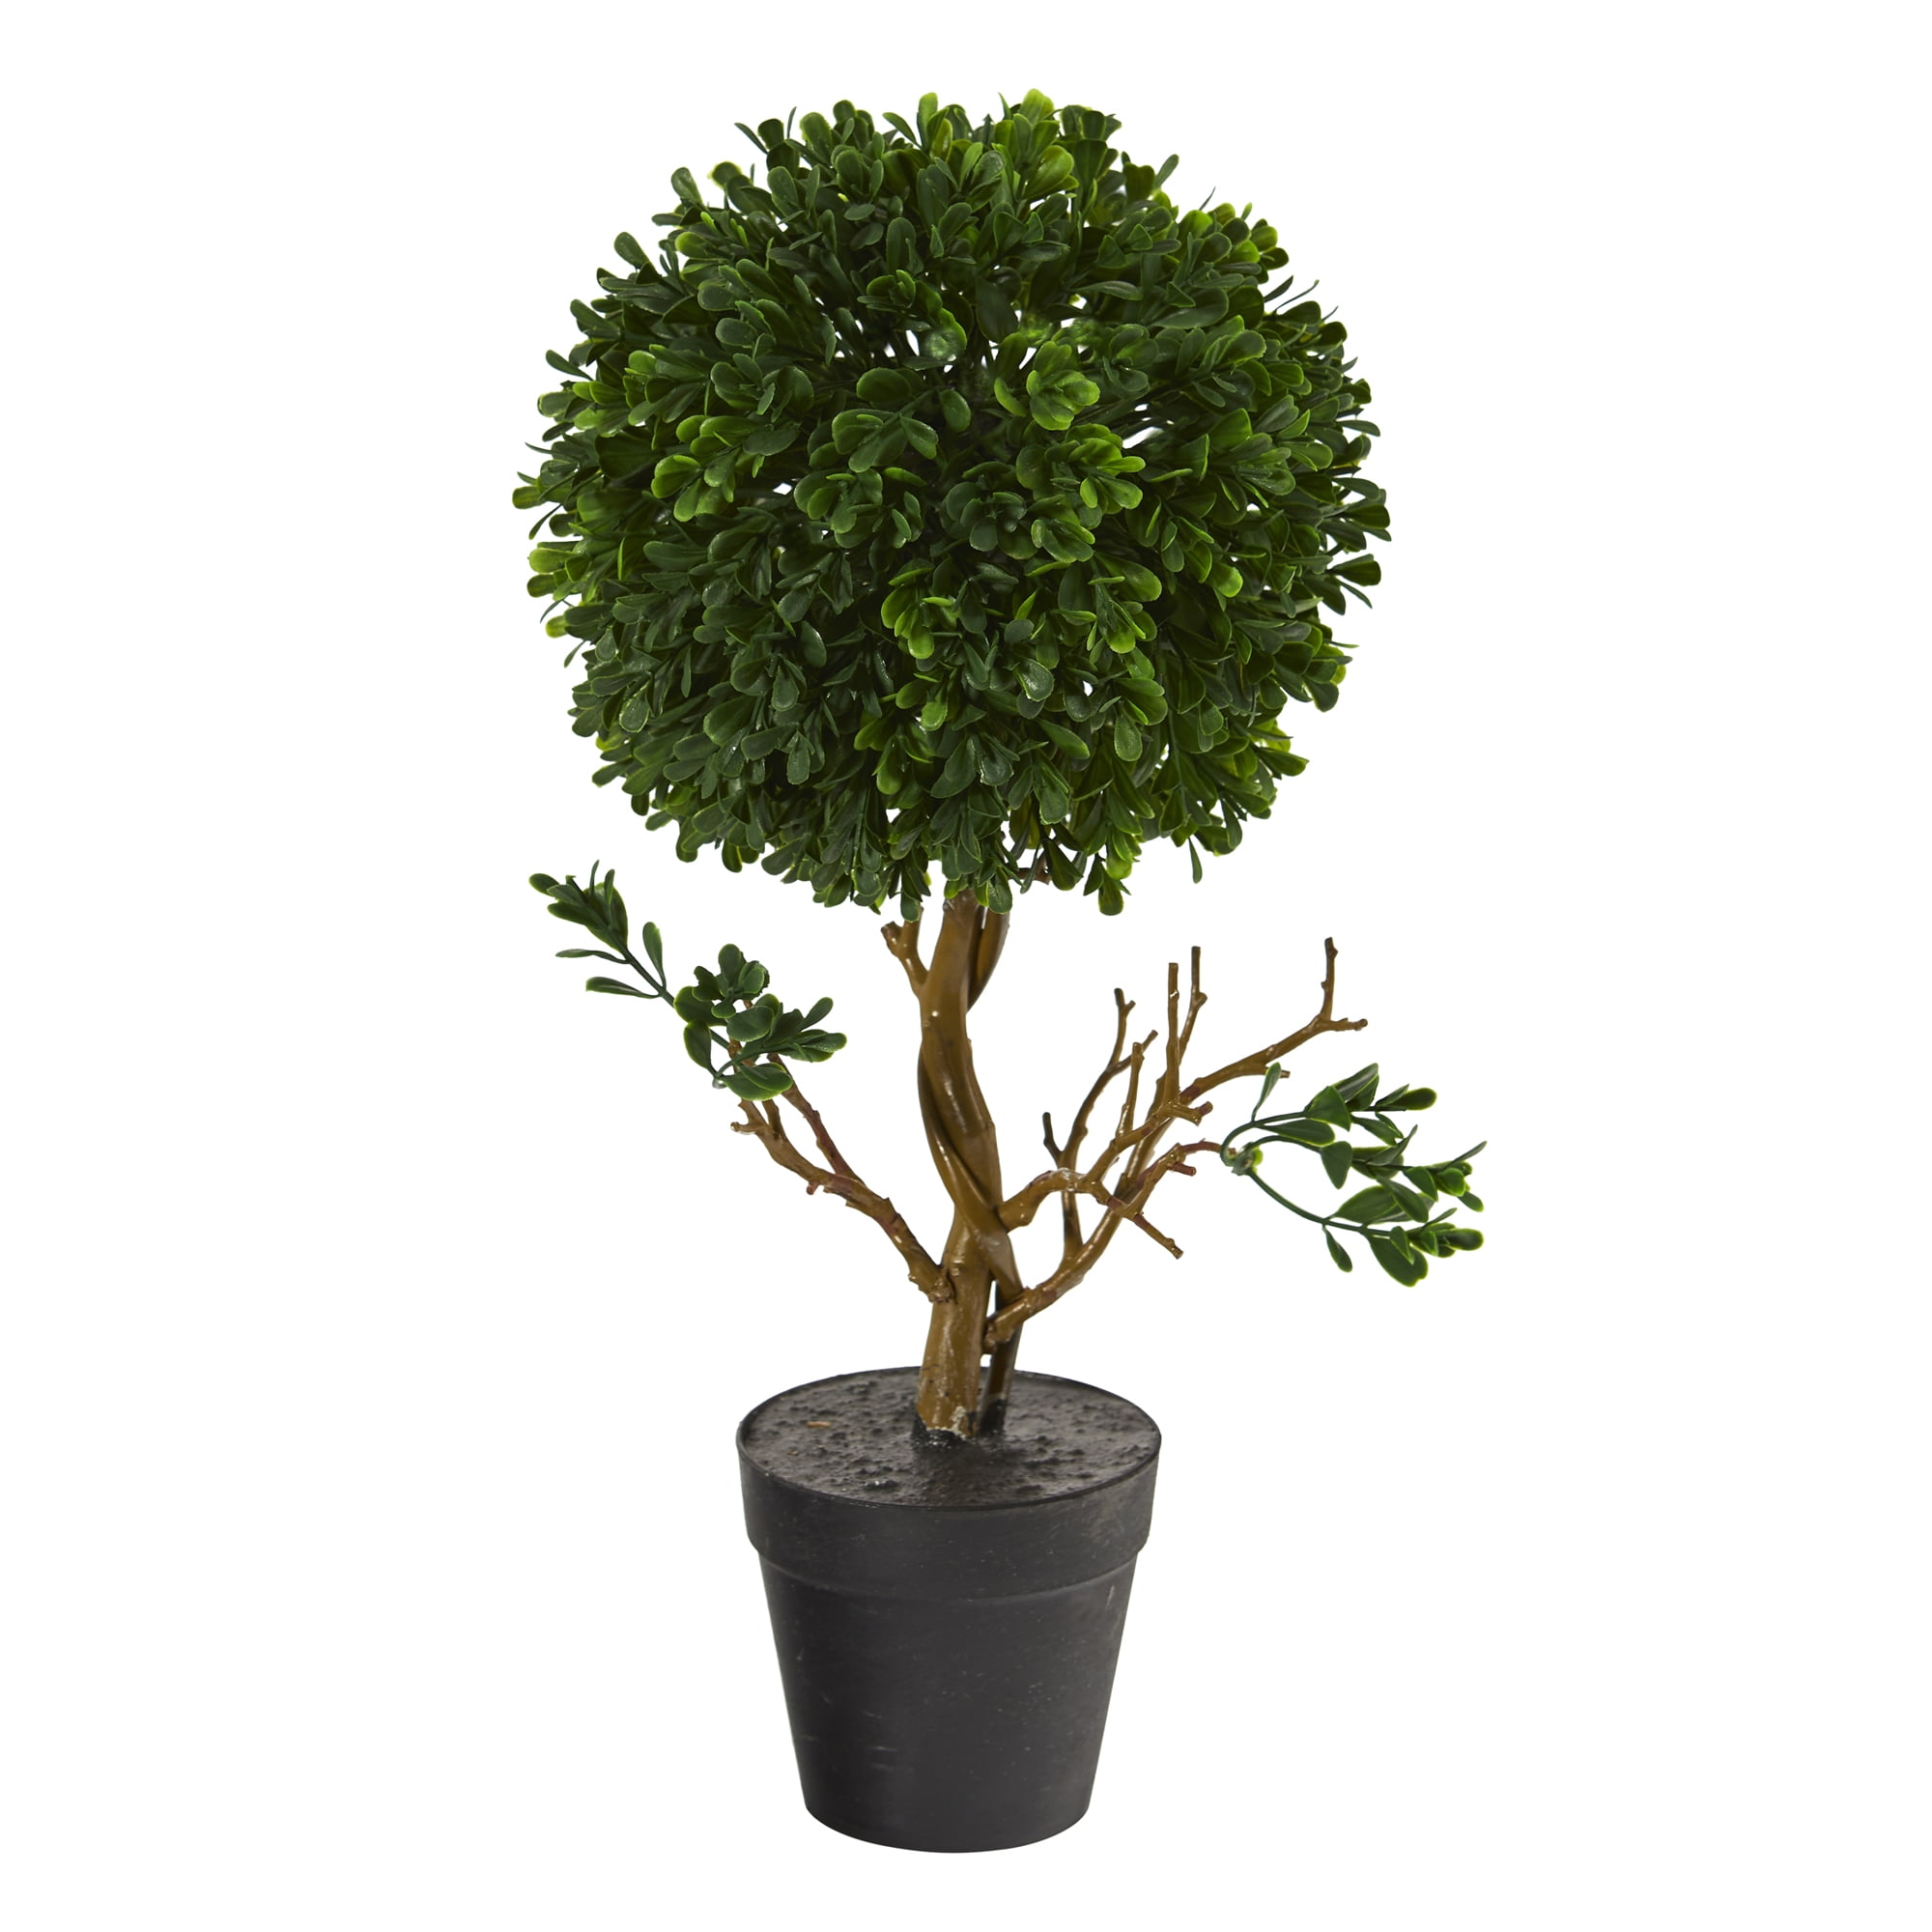 PLANT Artificial Boxwood Cone Topiary Tree Fake Leave Potted Plant with Galvaniz 